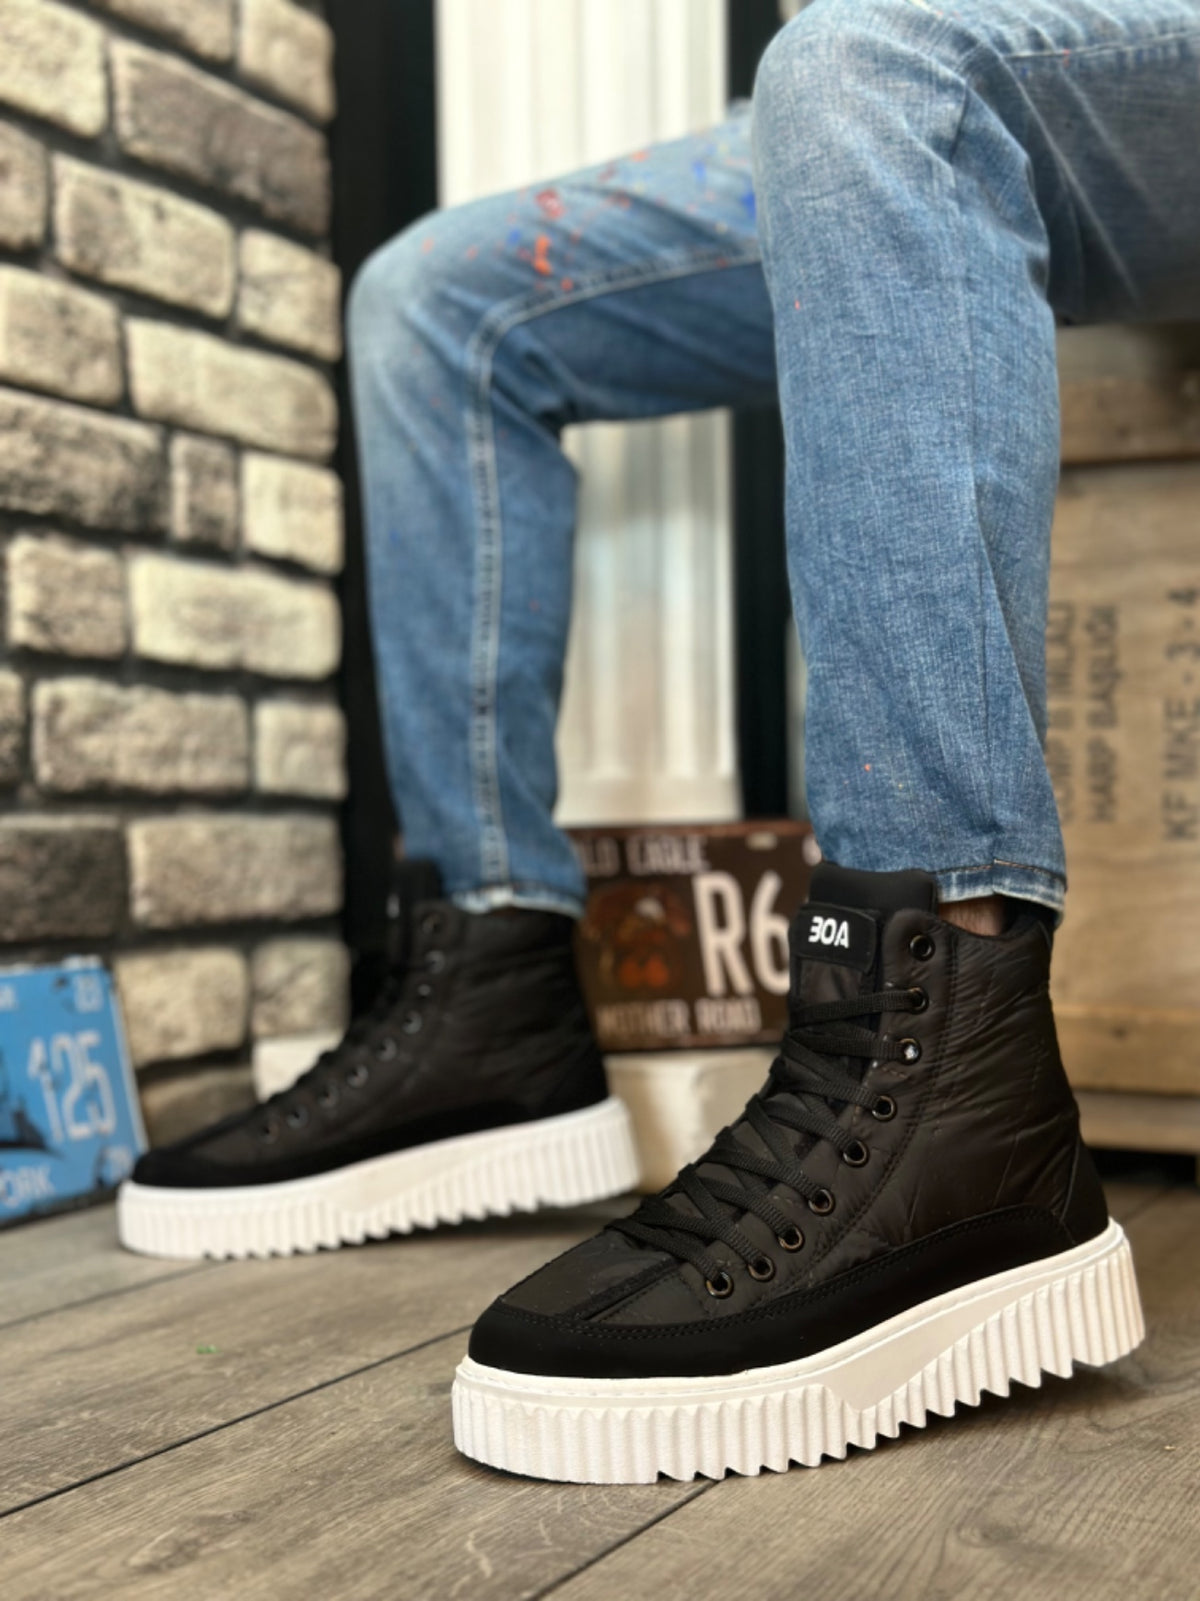 BA0811 High White Sole Black Parachute Fabric Skin Detailed Half Ankle Sports Boots - STREETMODE ™